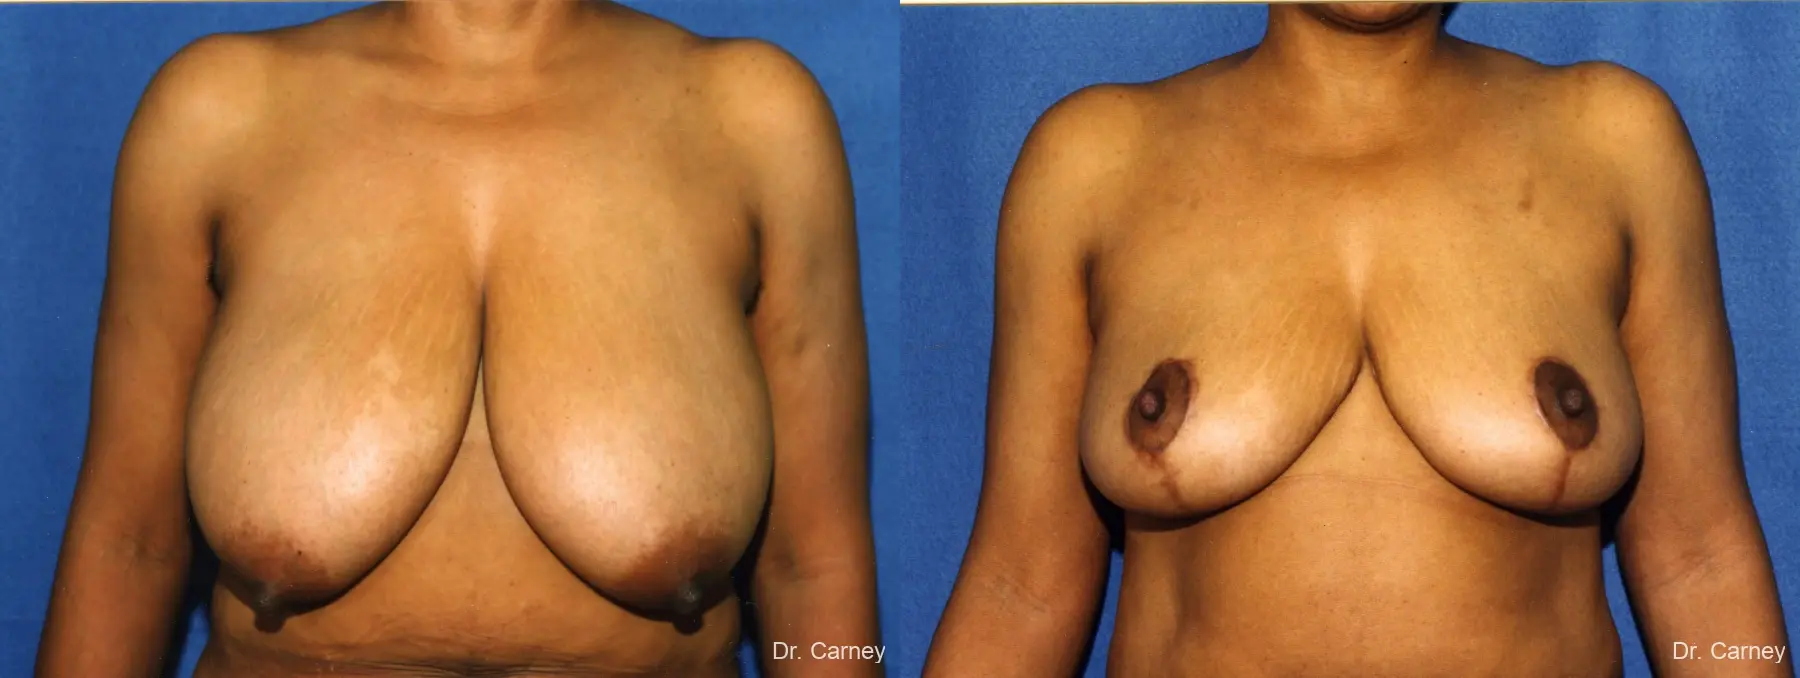 Virginia Beach Breast Reduction 1228. - Before and After 1